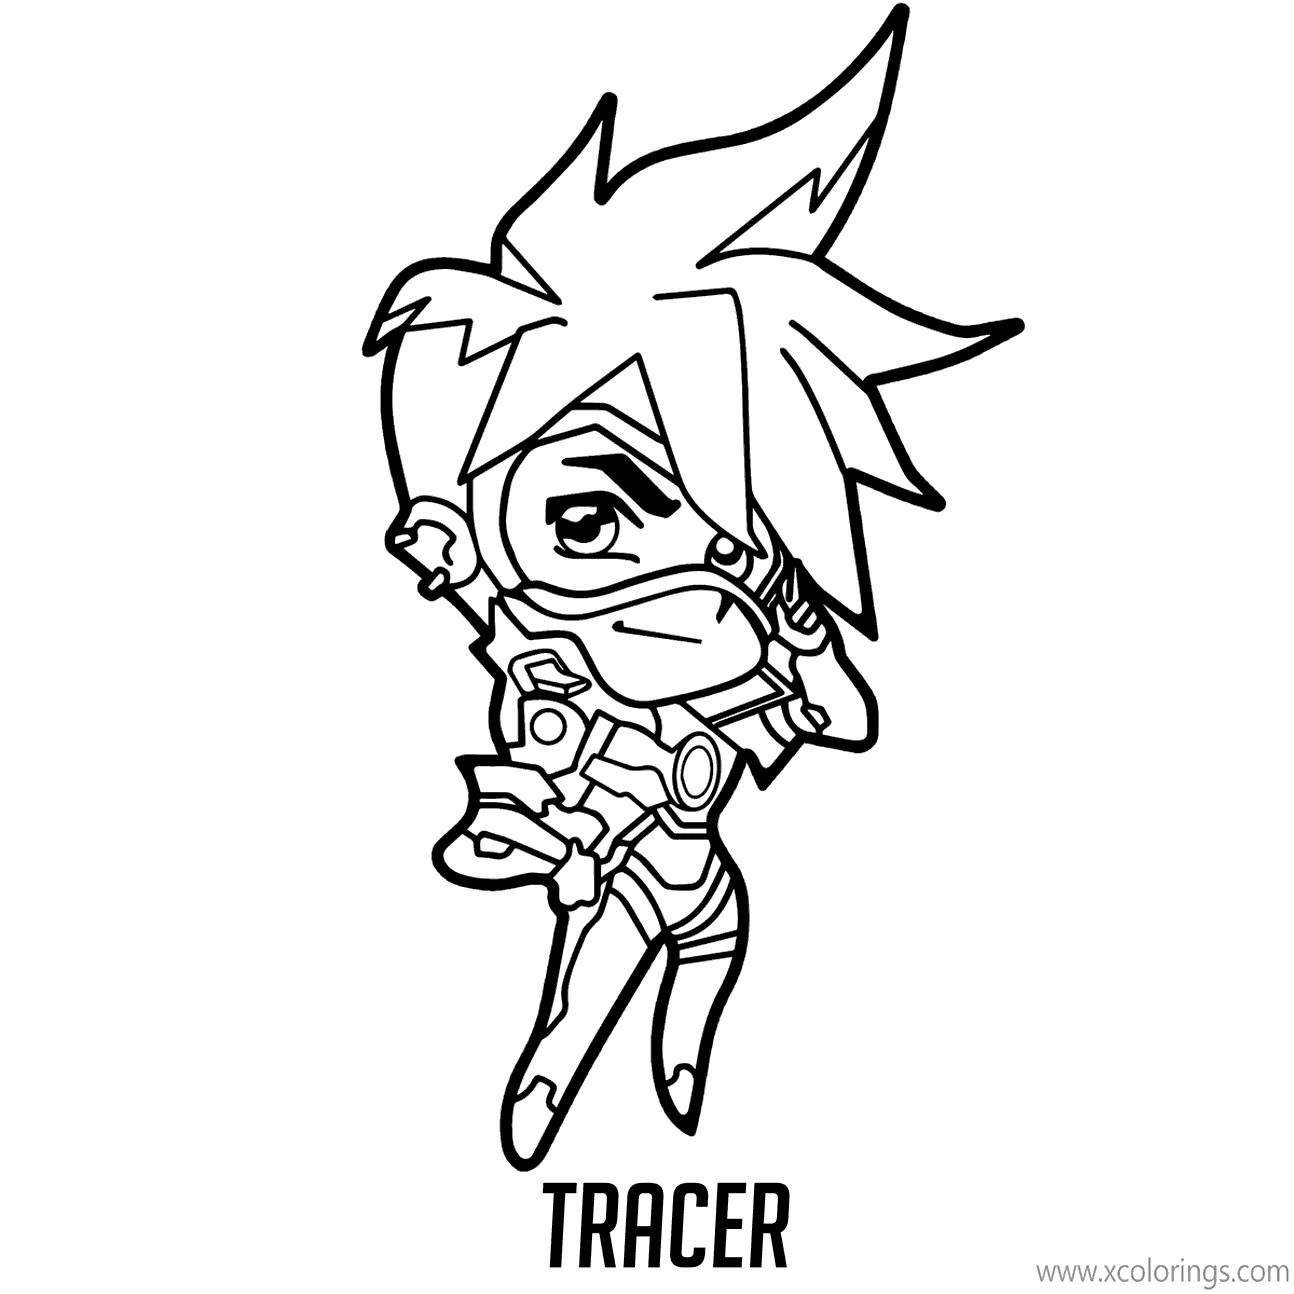 Free Overwatch Coloring Pages Tracer printable